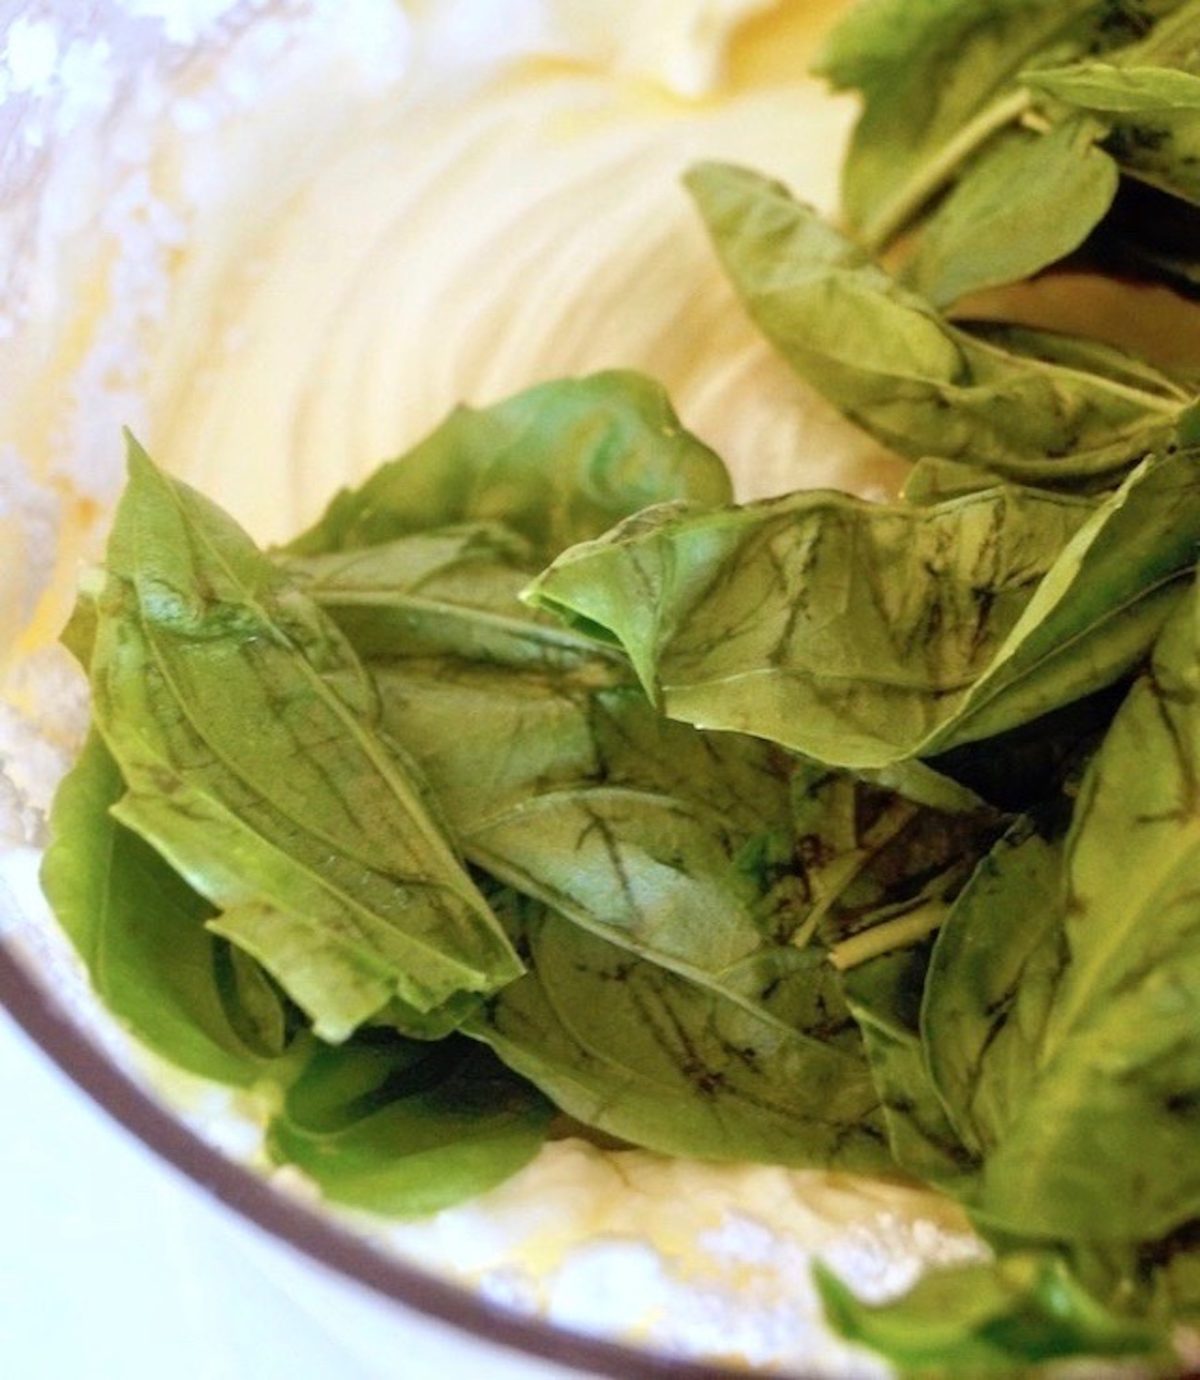 Cream cheese and fresh basil leaves in a food processor bowl.